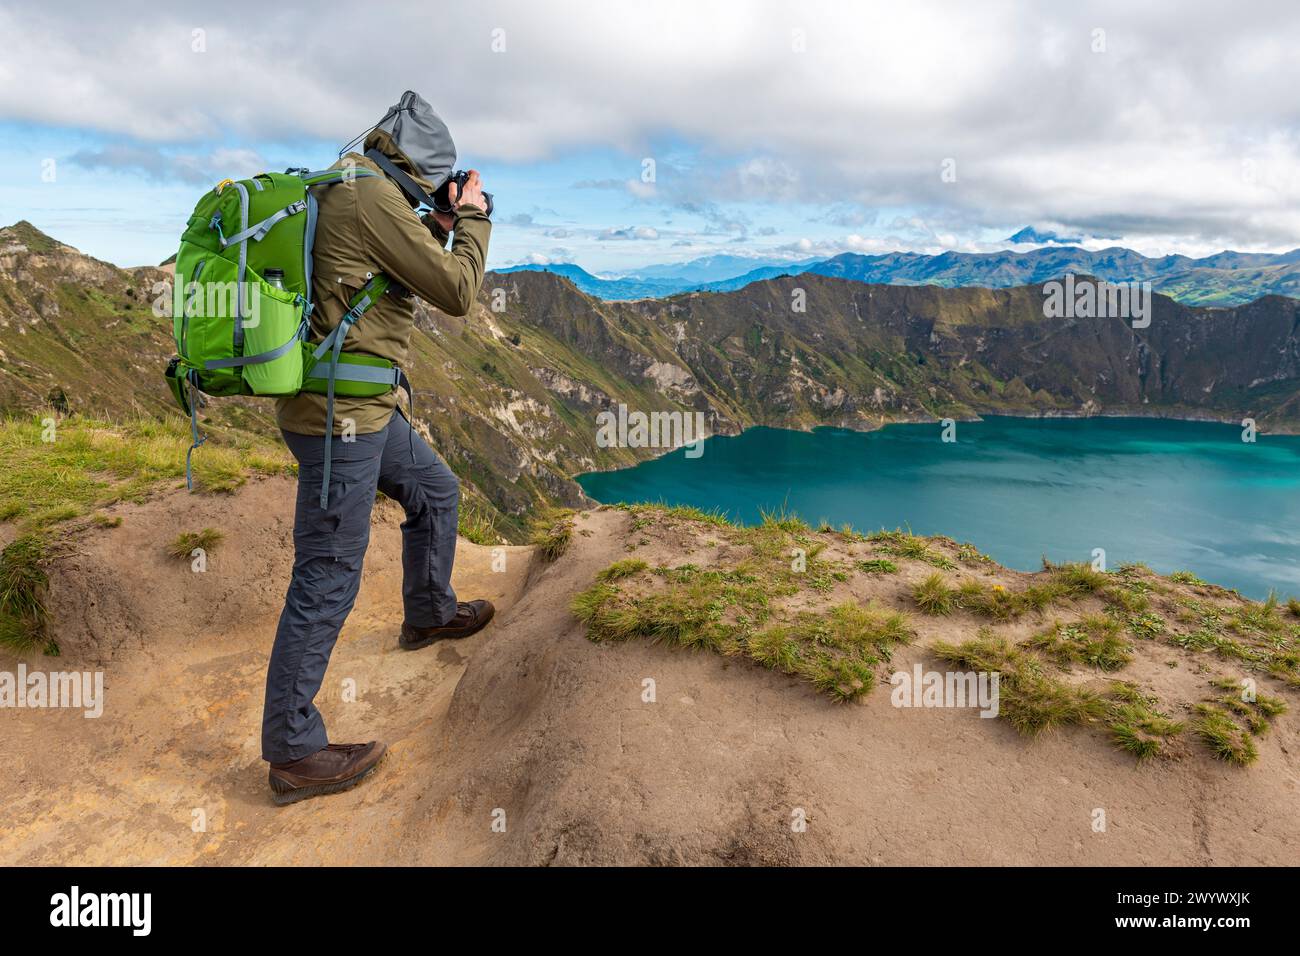 Male photographer in trekking outfit taking photographs of the Quilotoa Lake along the Quilotoa Loop Hike, Andes Mountains, Quito, Ecuador. Stock Photo